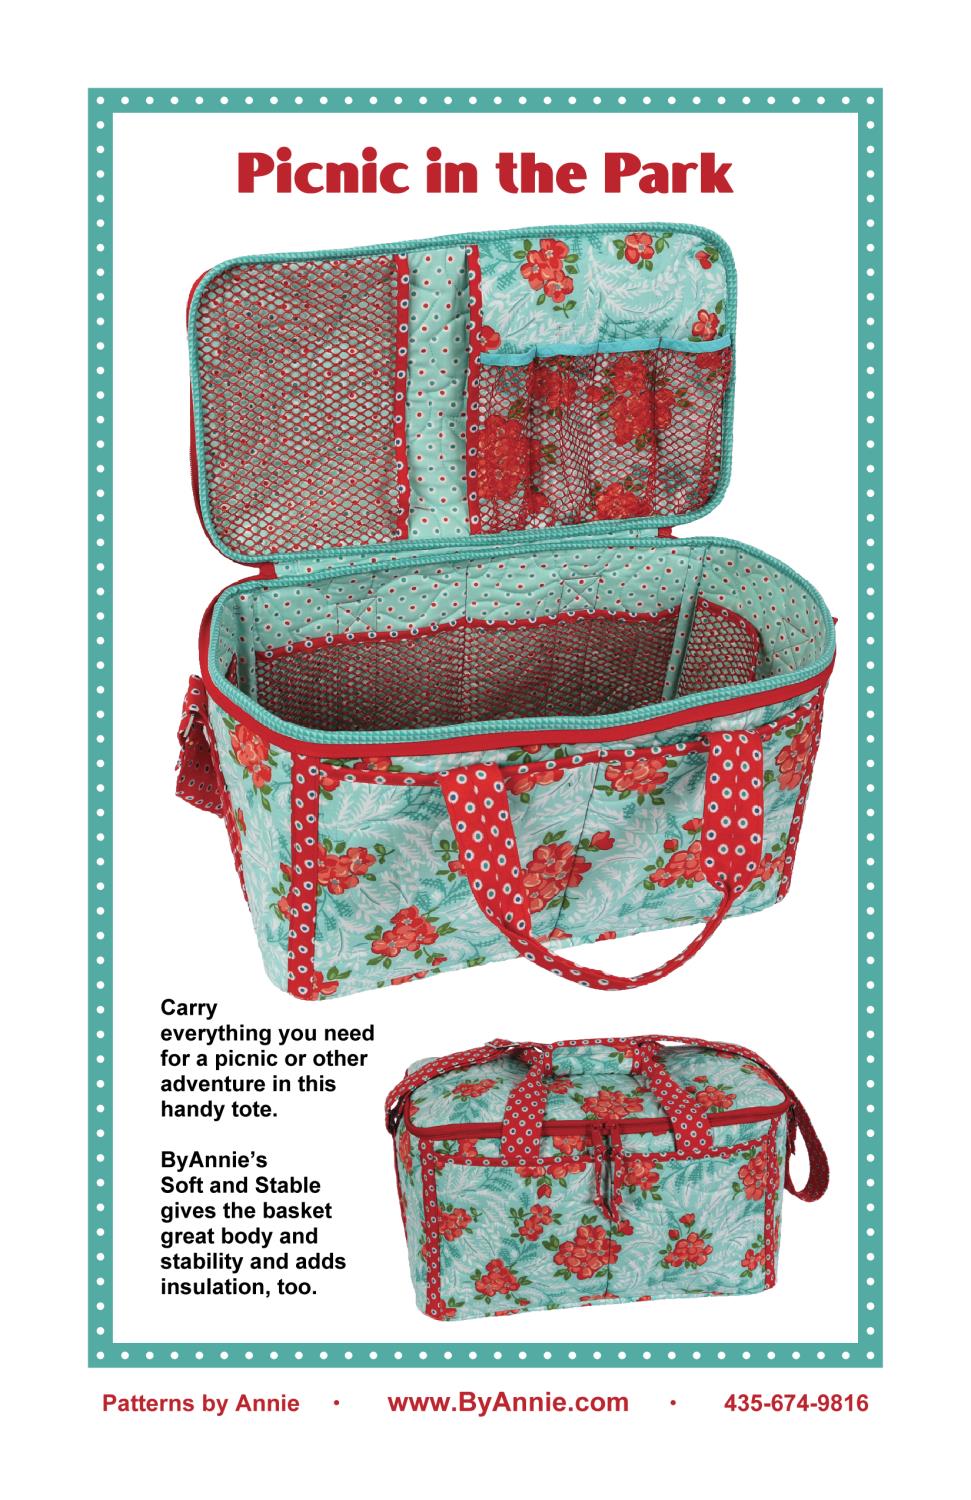 Picnic in the Park – Patterns by Annie